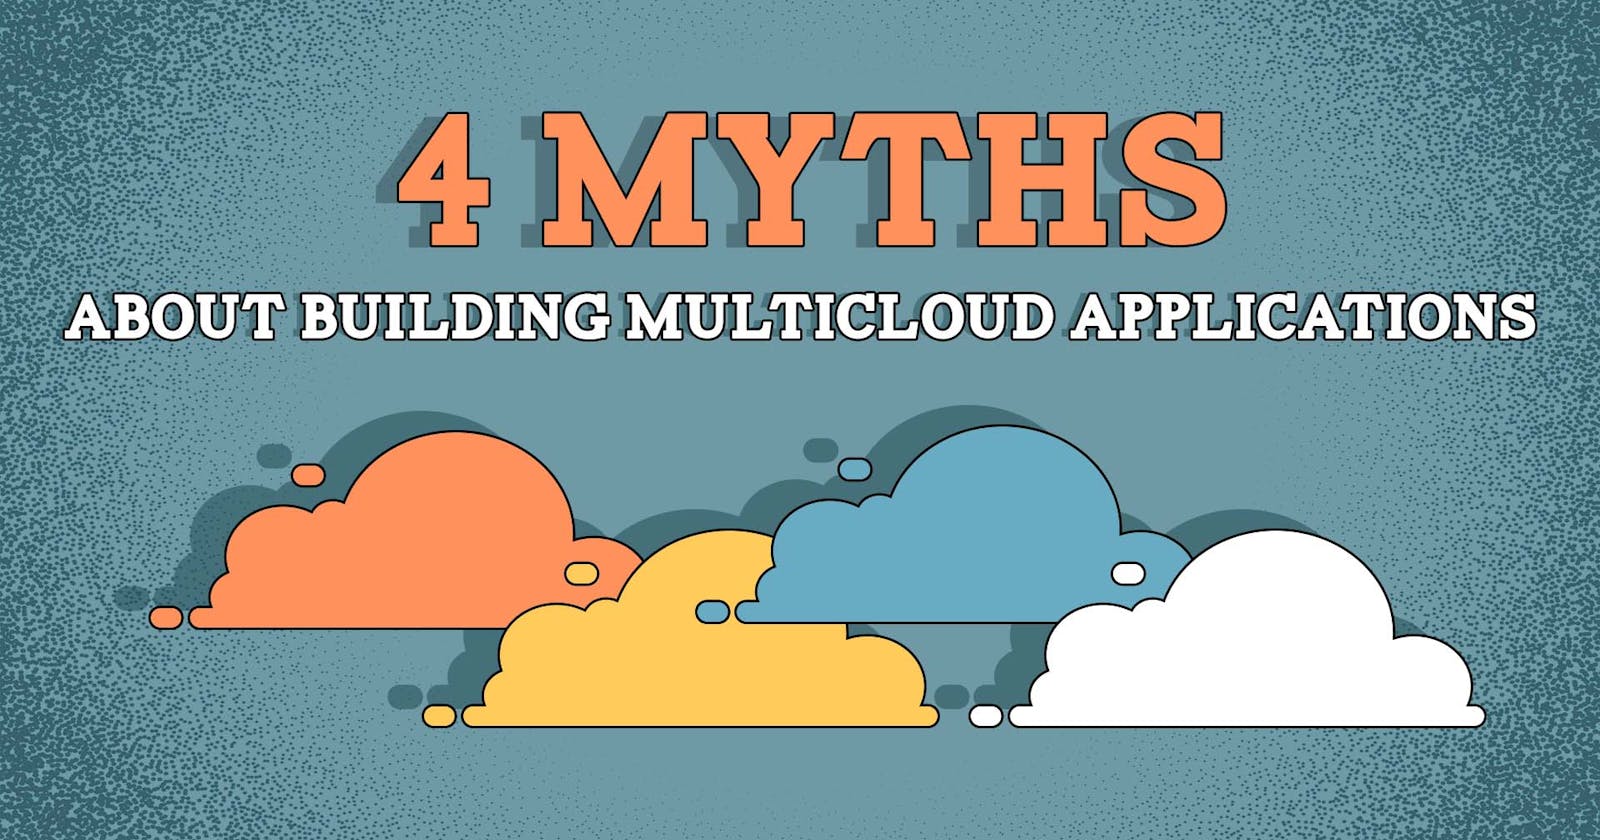 4 Myths about Building Multicloud Applications